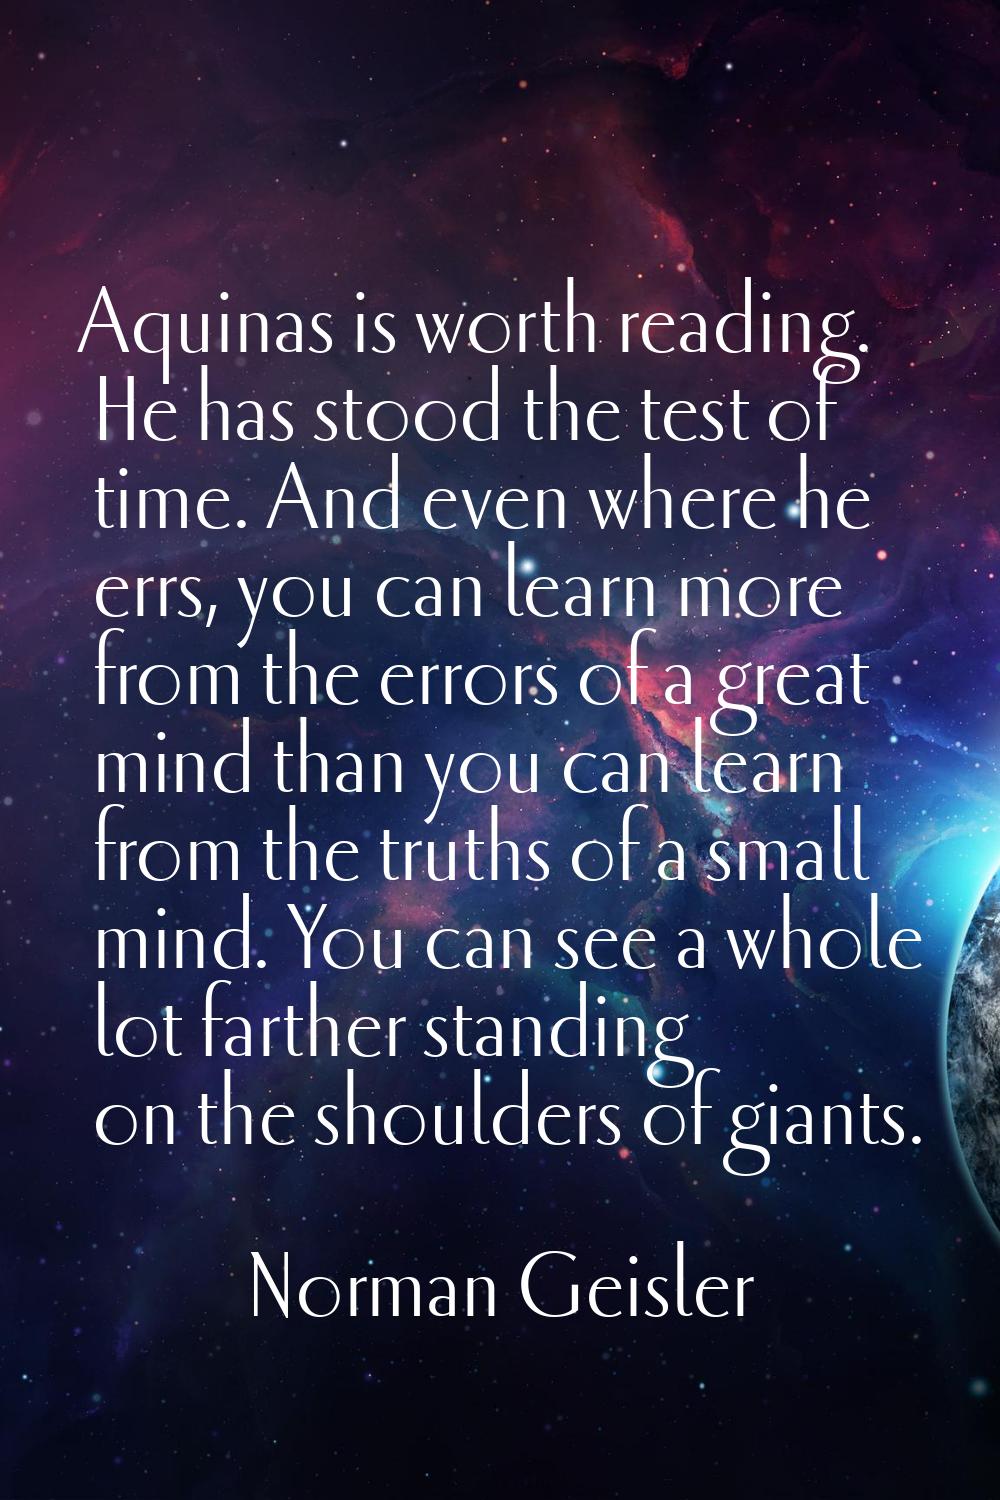 Aquinas is worth reading. He has stood the test of time. And even where he errs, you can learn more